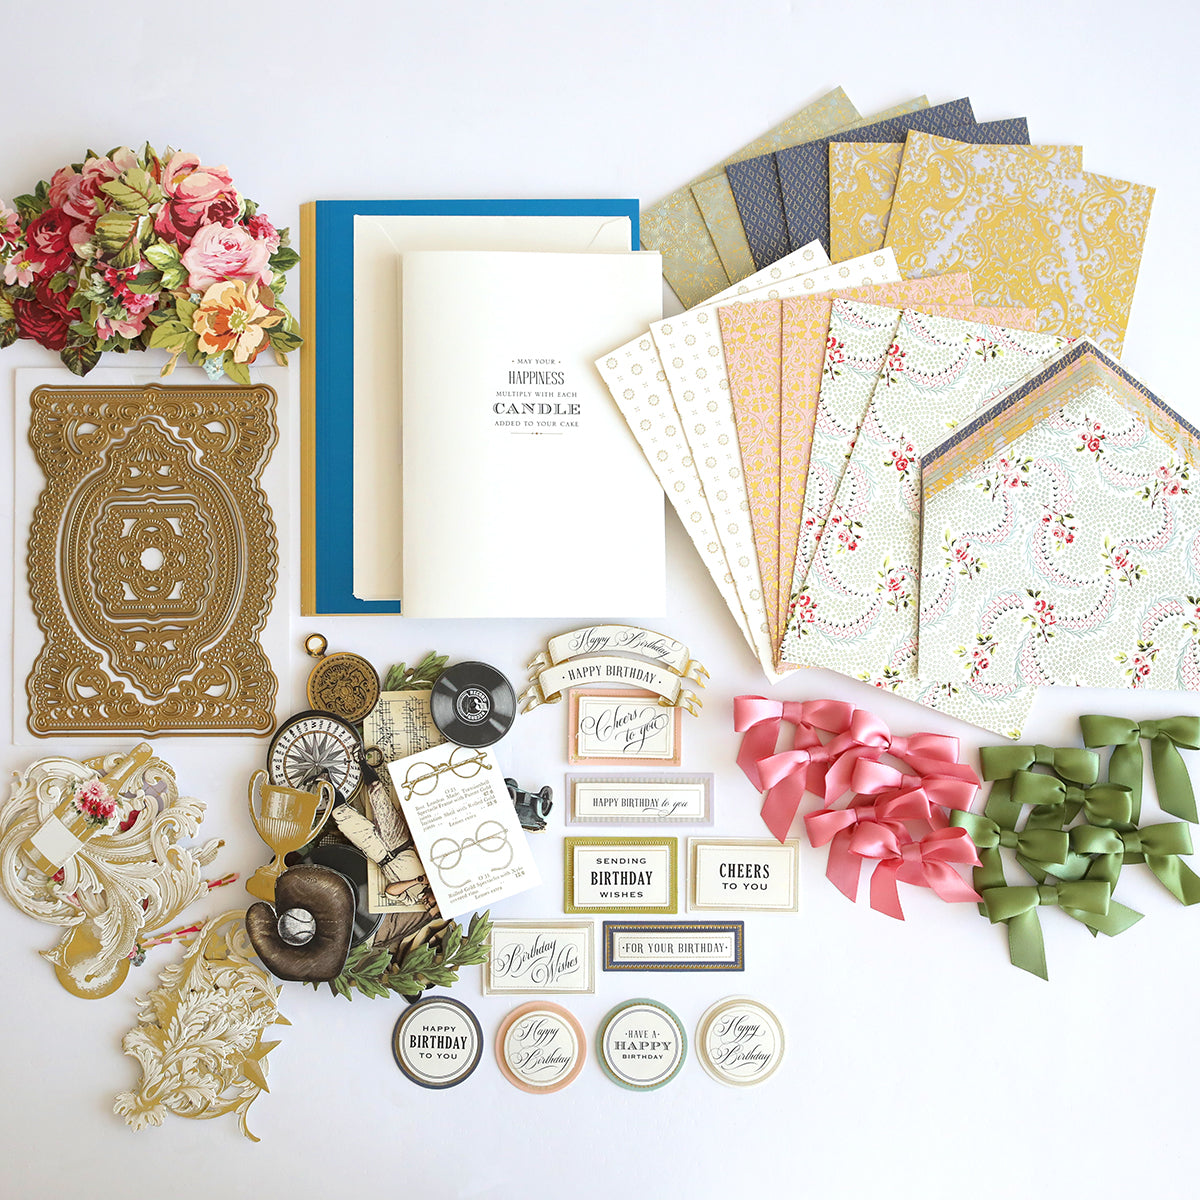 A variety of Beautiful Birthday Class Materials and Dies by Anna Griffin, supplies, and other items are laid out on a table.